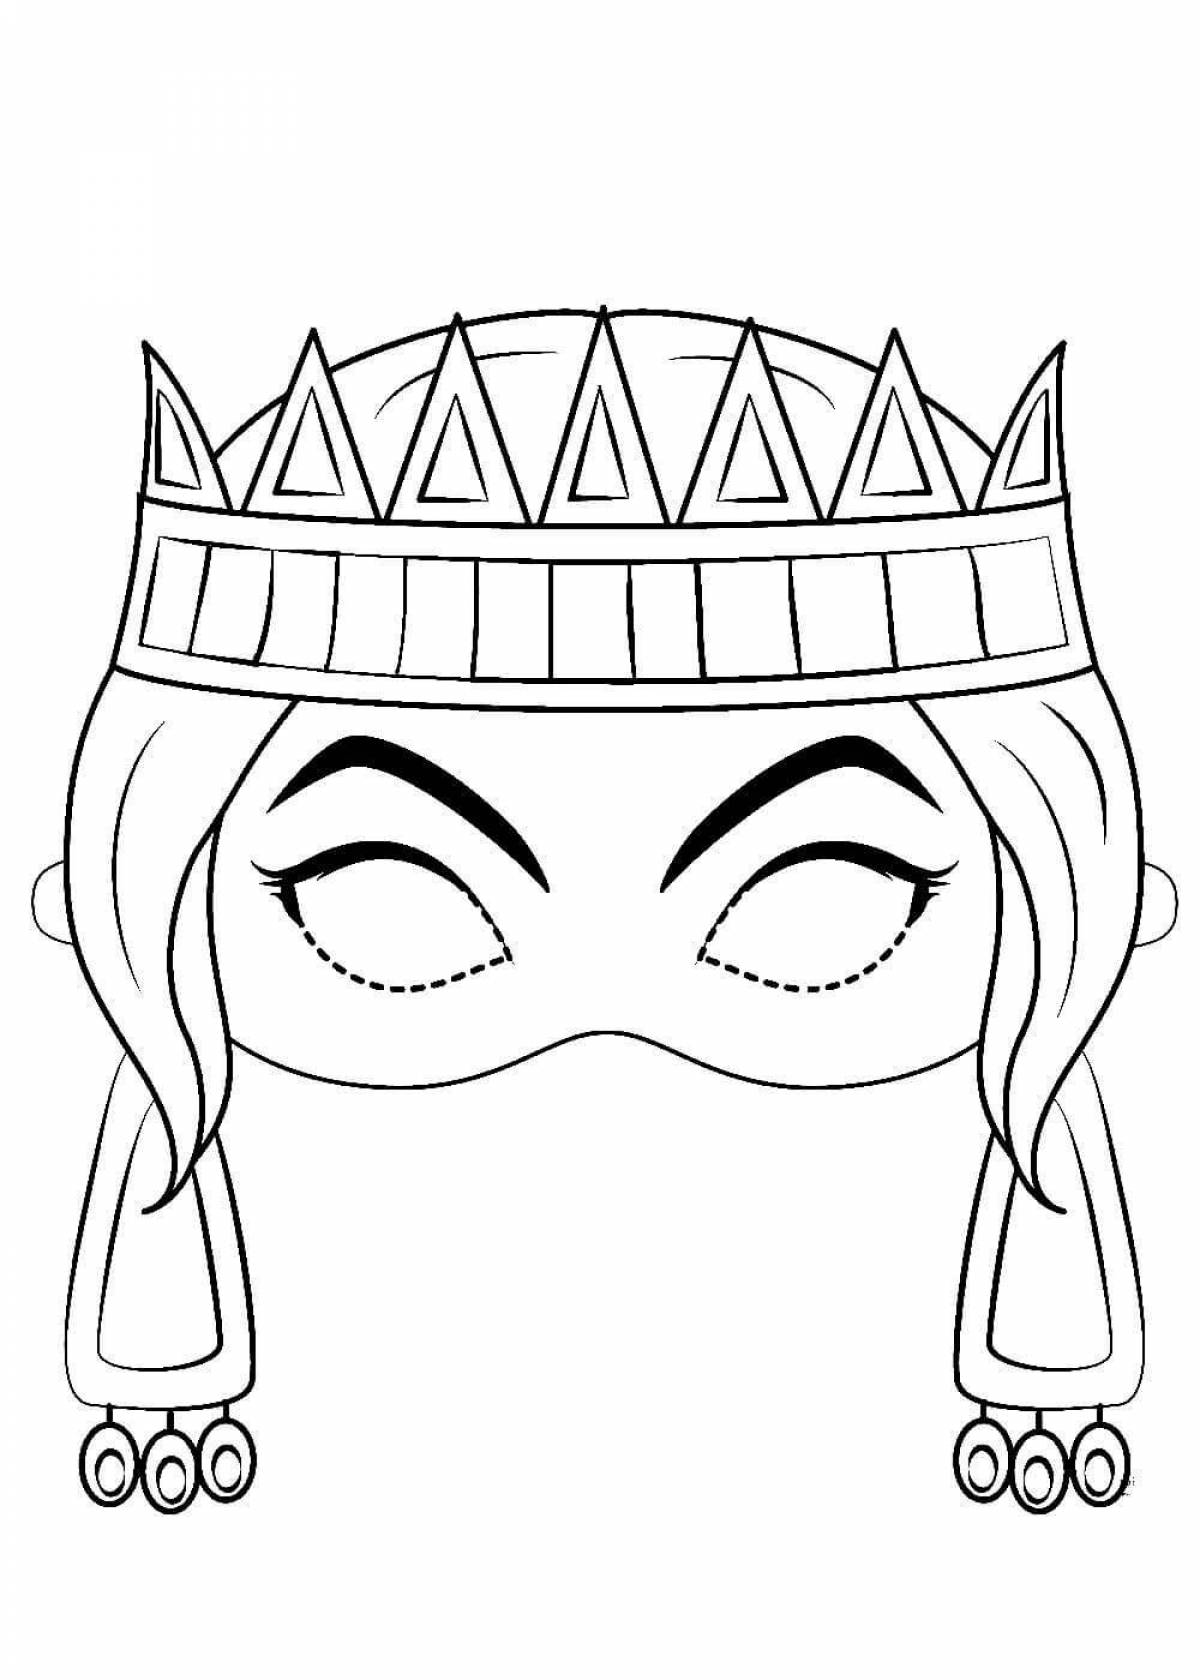 Outstanding mask coloring page